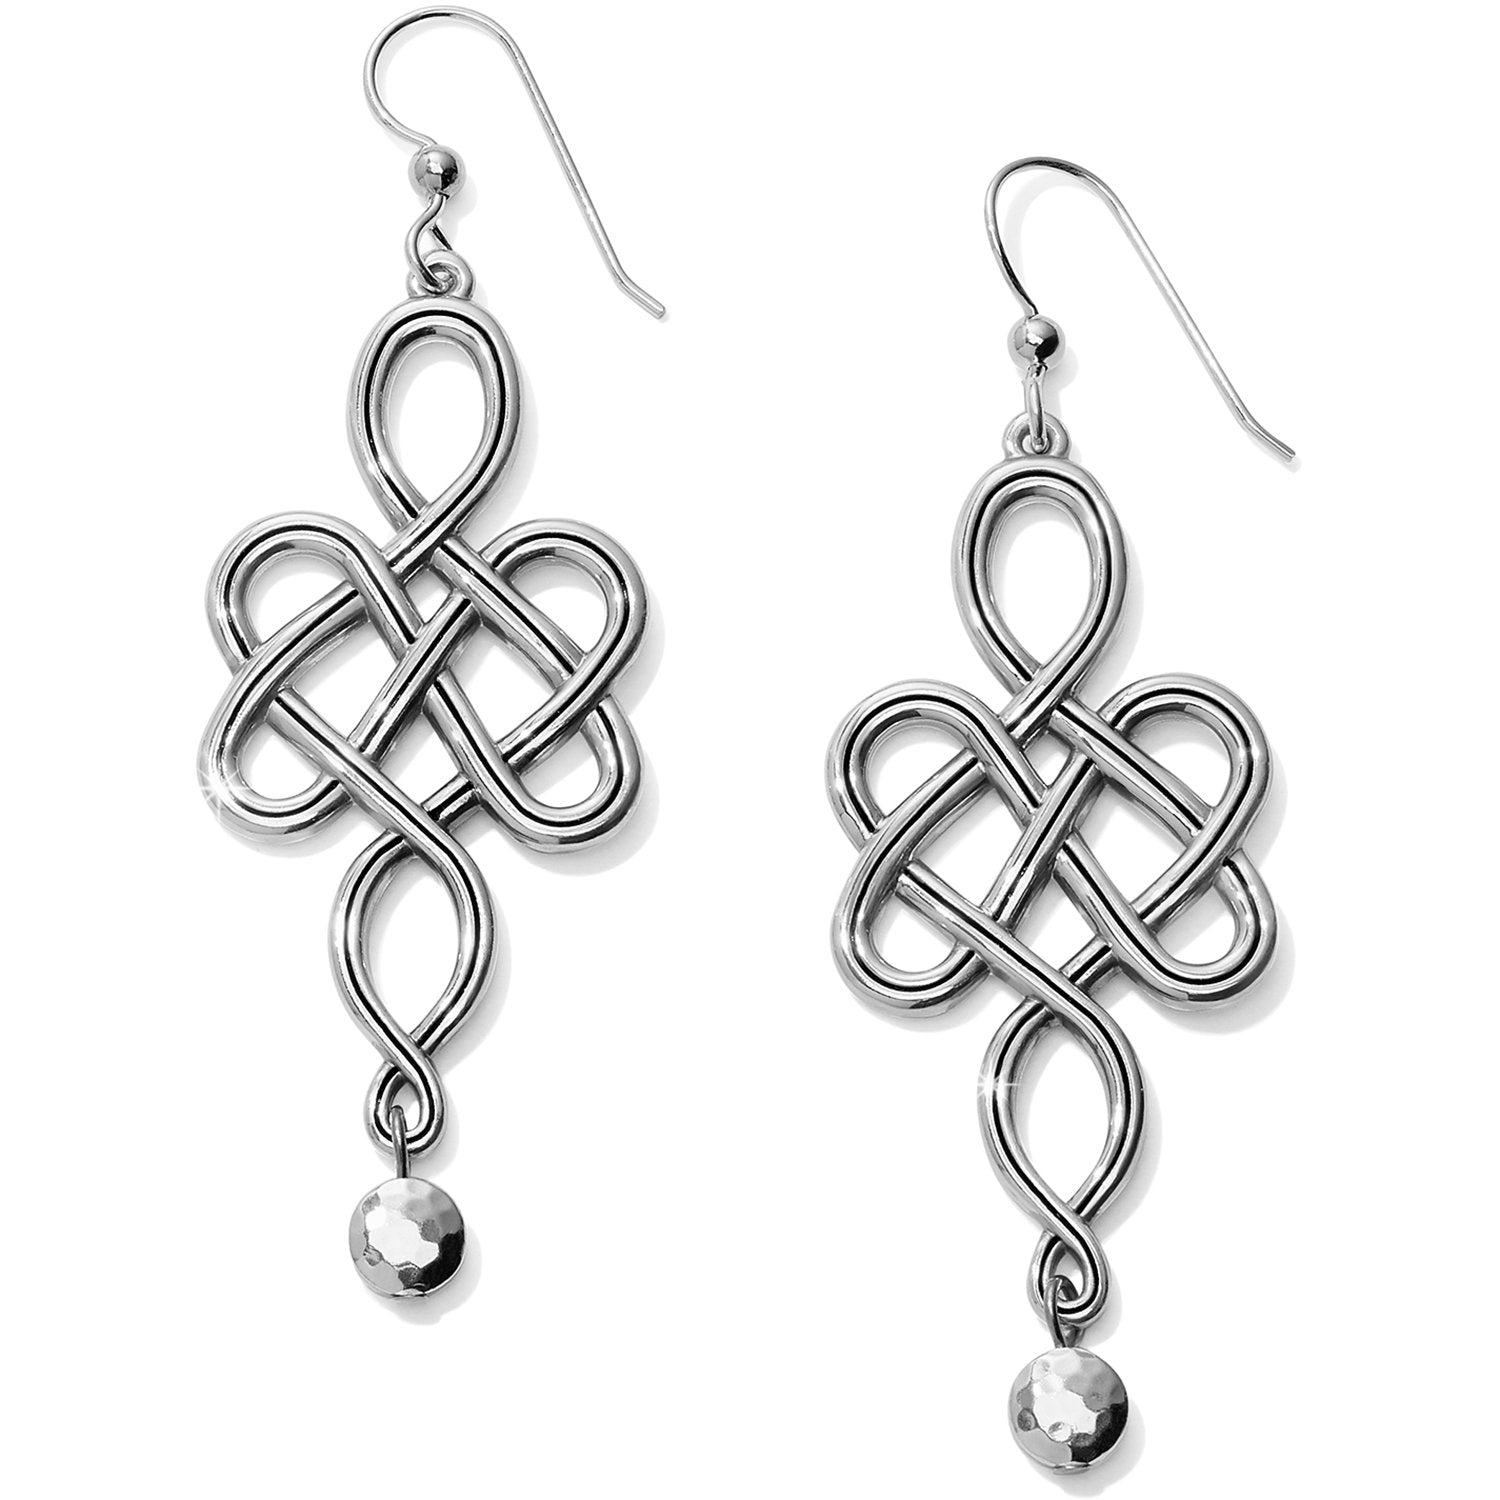 Interlok Endless Knot French Wire Earrings Front View